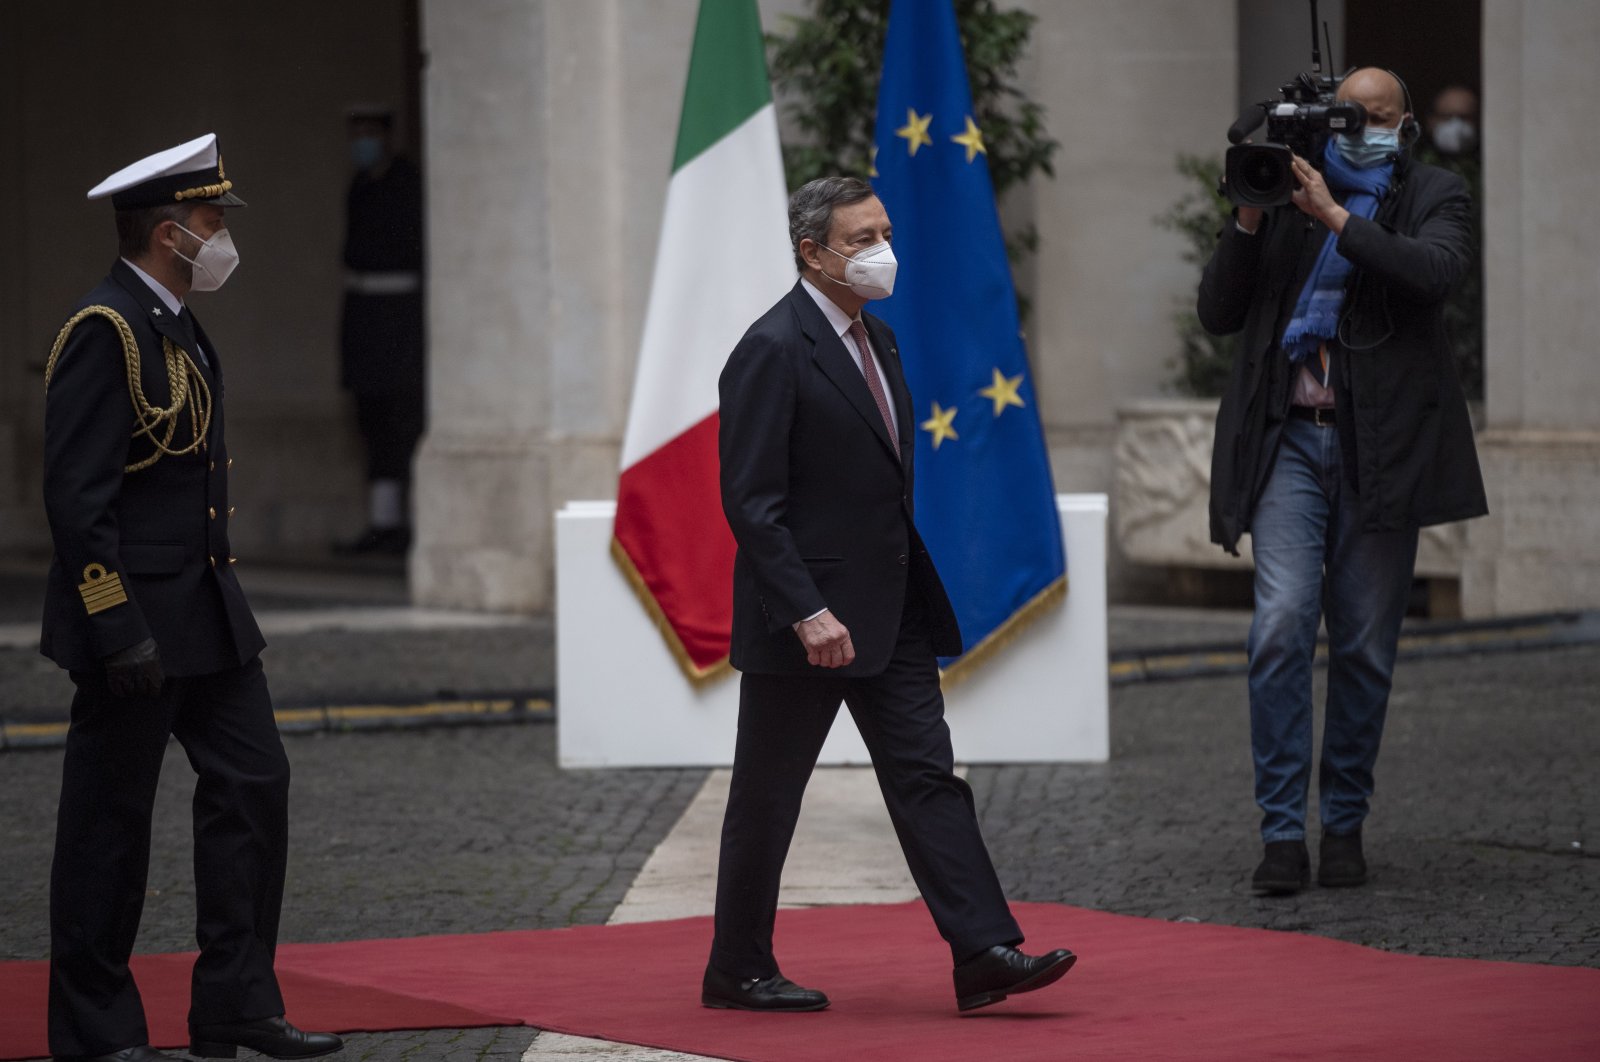 Italian Prime Minister Mario Draghi arrives at Palazzo Chigi for a formal handover ceremony and the first ministry council meeting of the new Italian government, Rome, Italy, Feb. 13, 2021. (Photo by Getty Images)